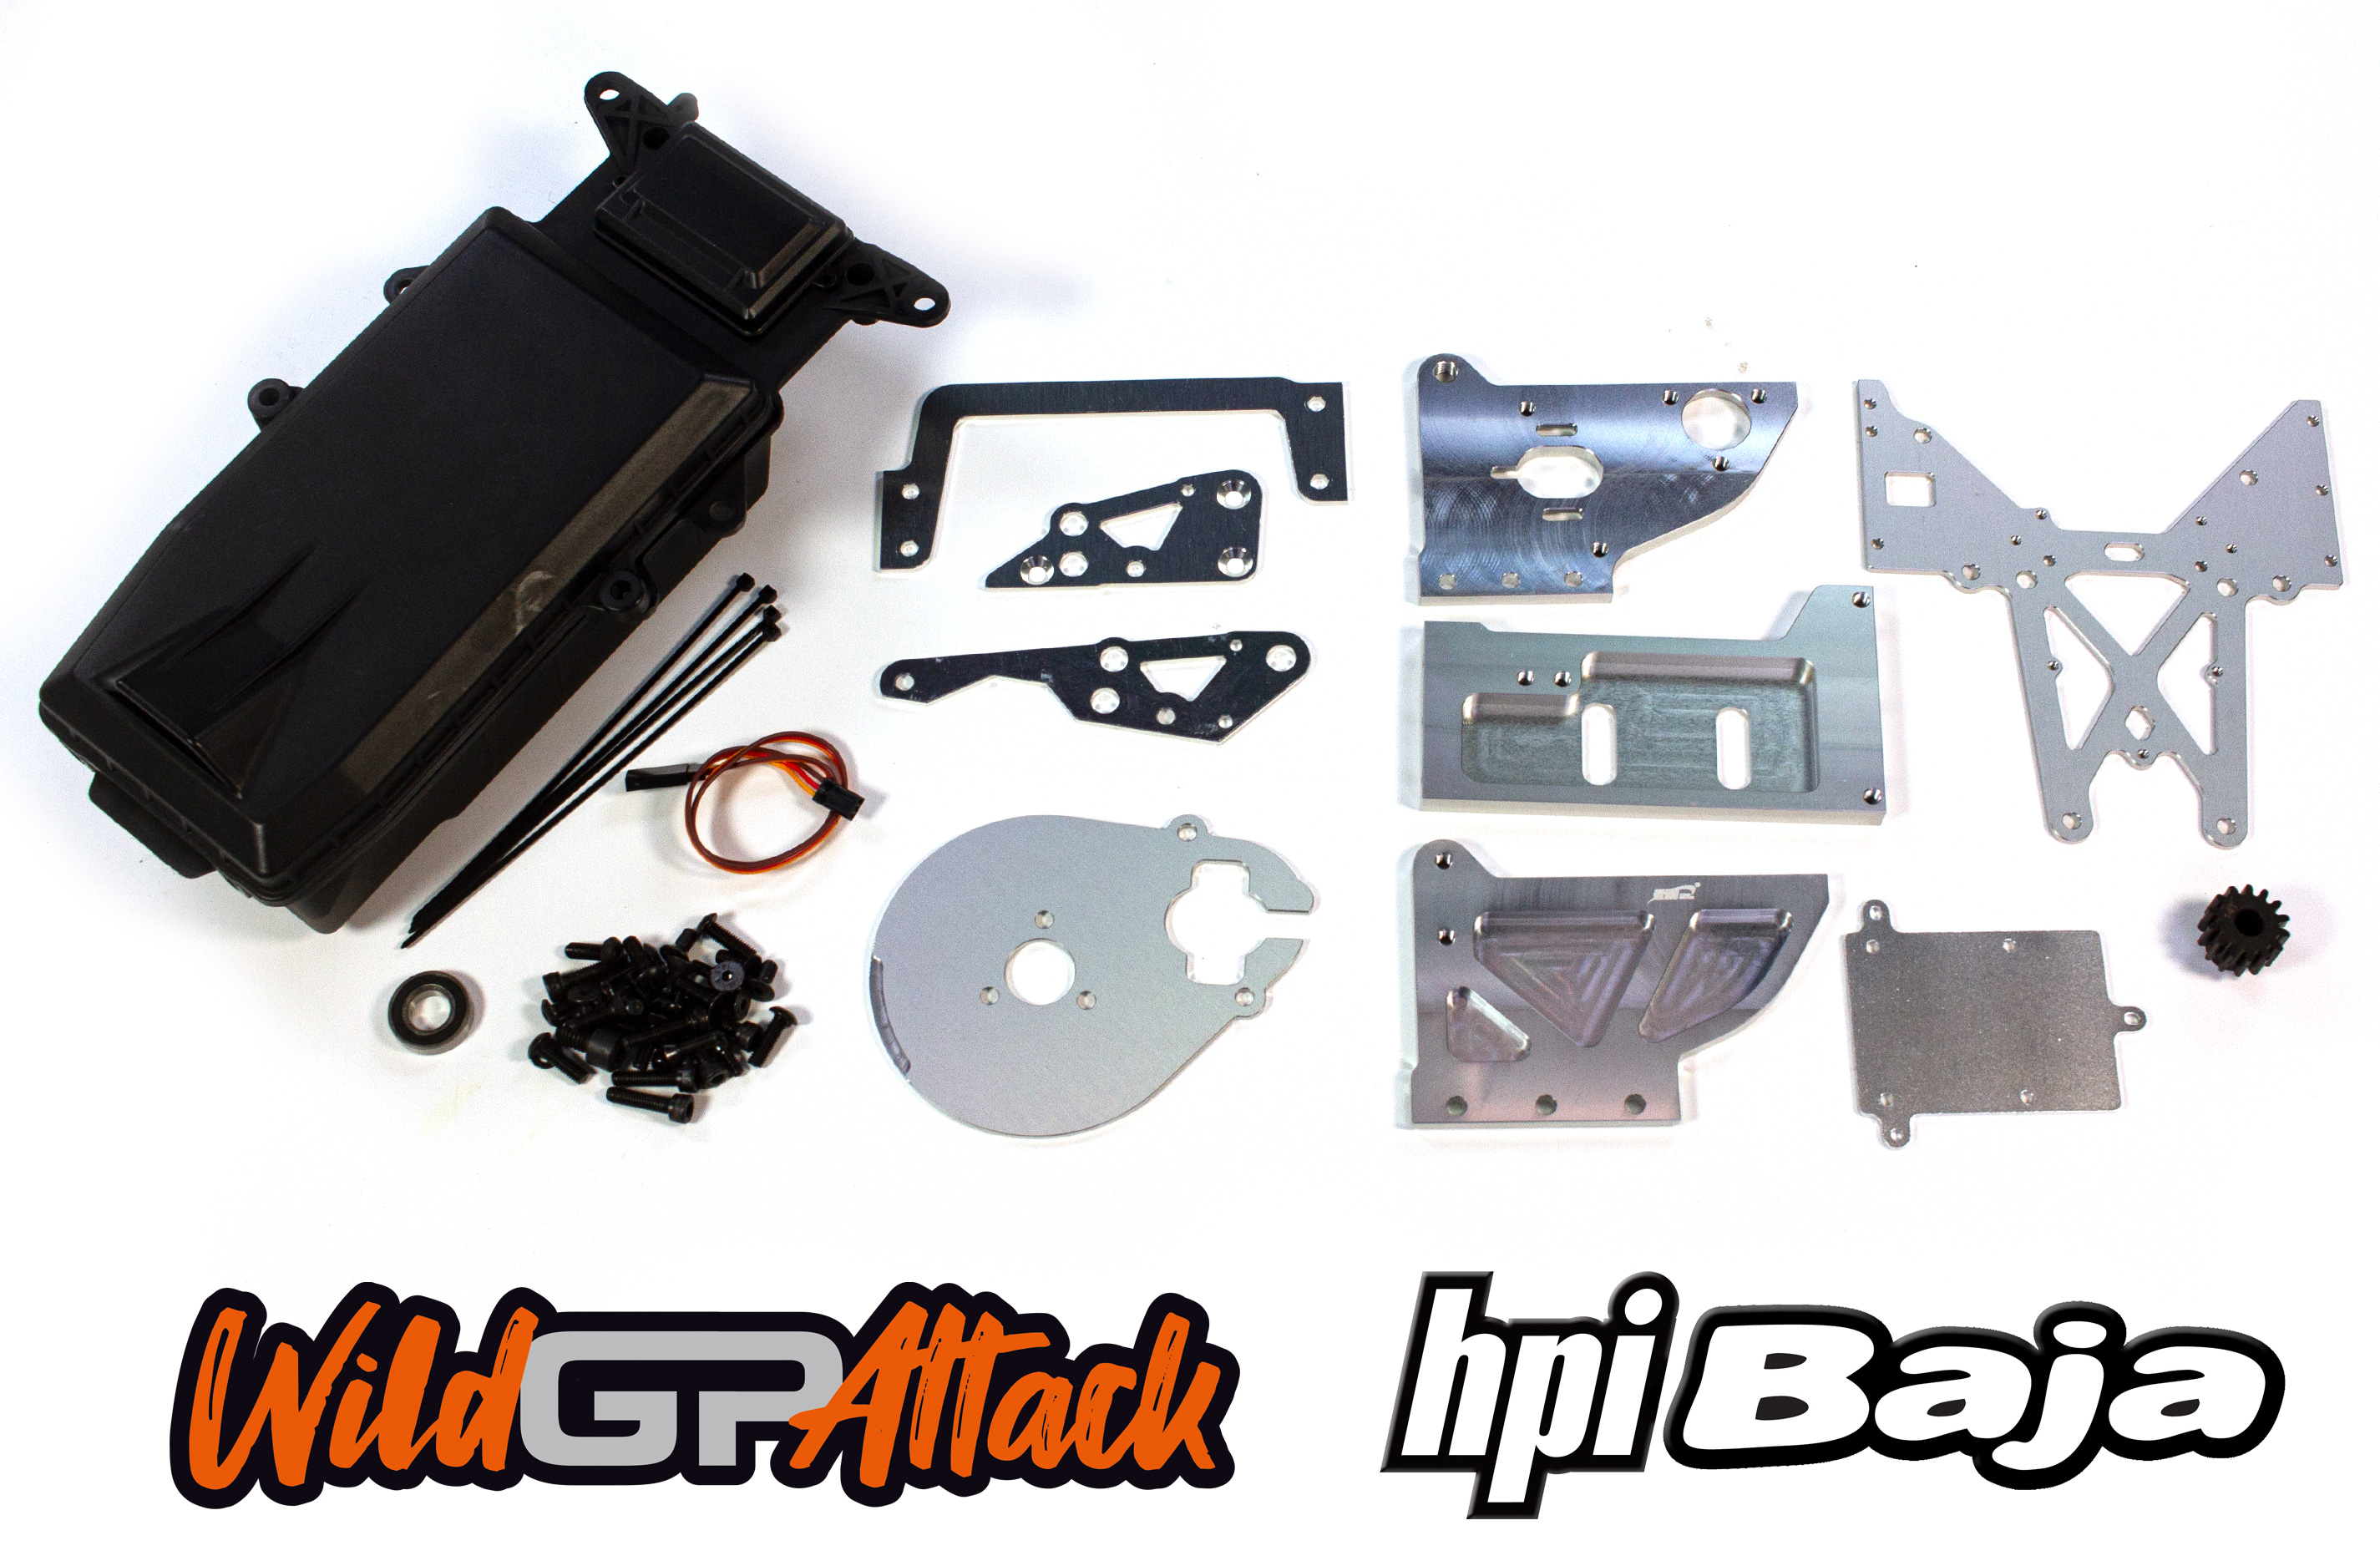 y1587 Conversion kit to electric drive for Carson Wild Attack and HPI Baja 5B